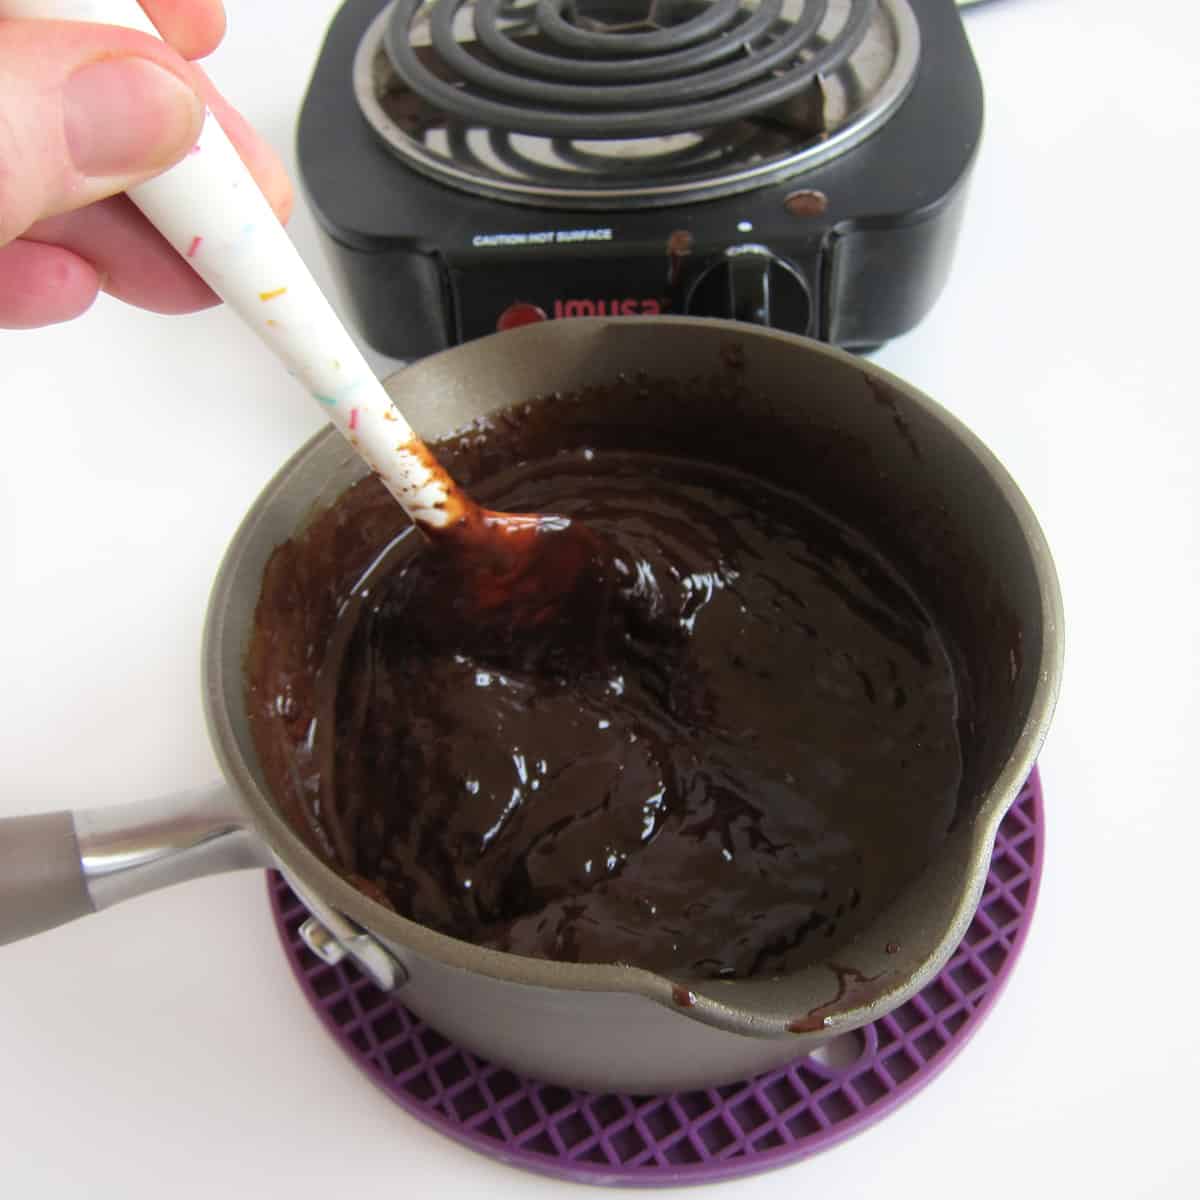 take chocolate ganache off the heat when 75% of the chocolate has melted